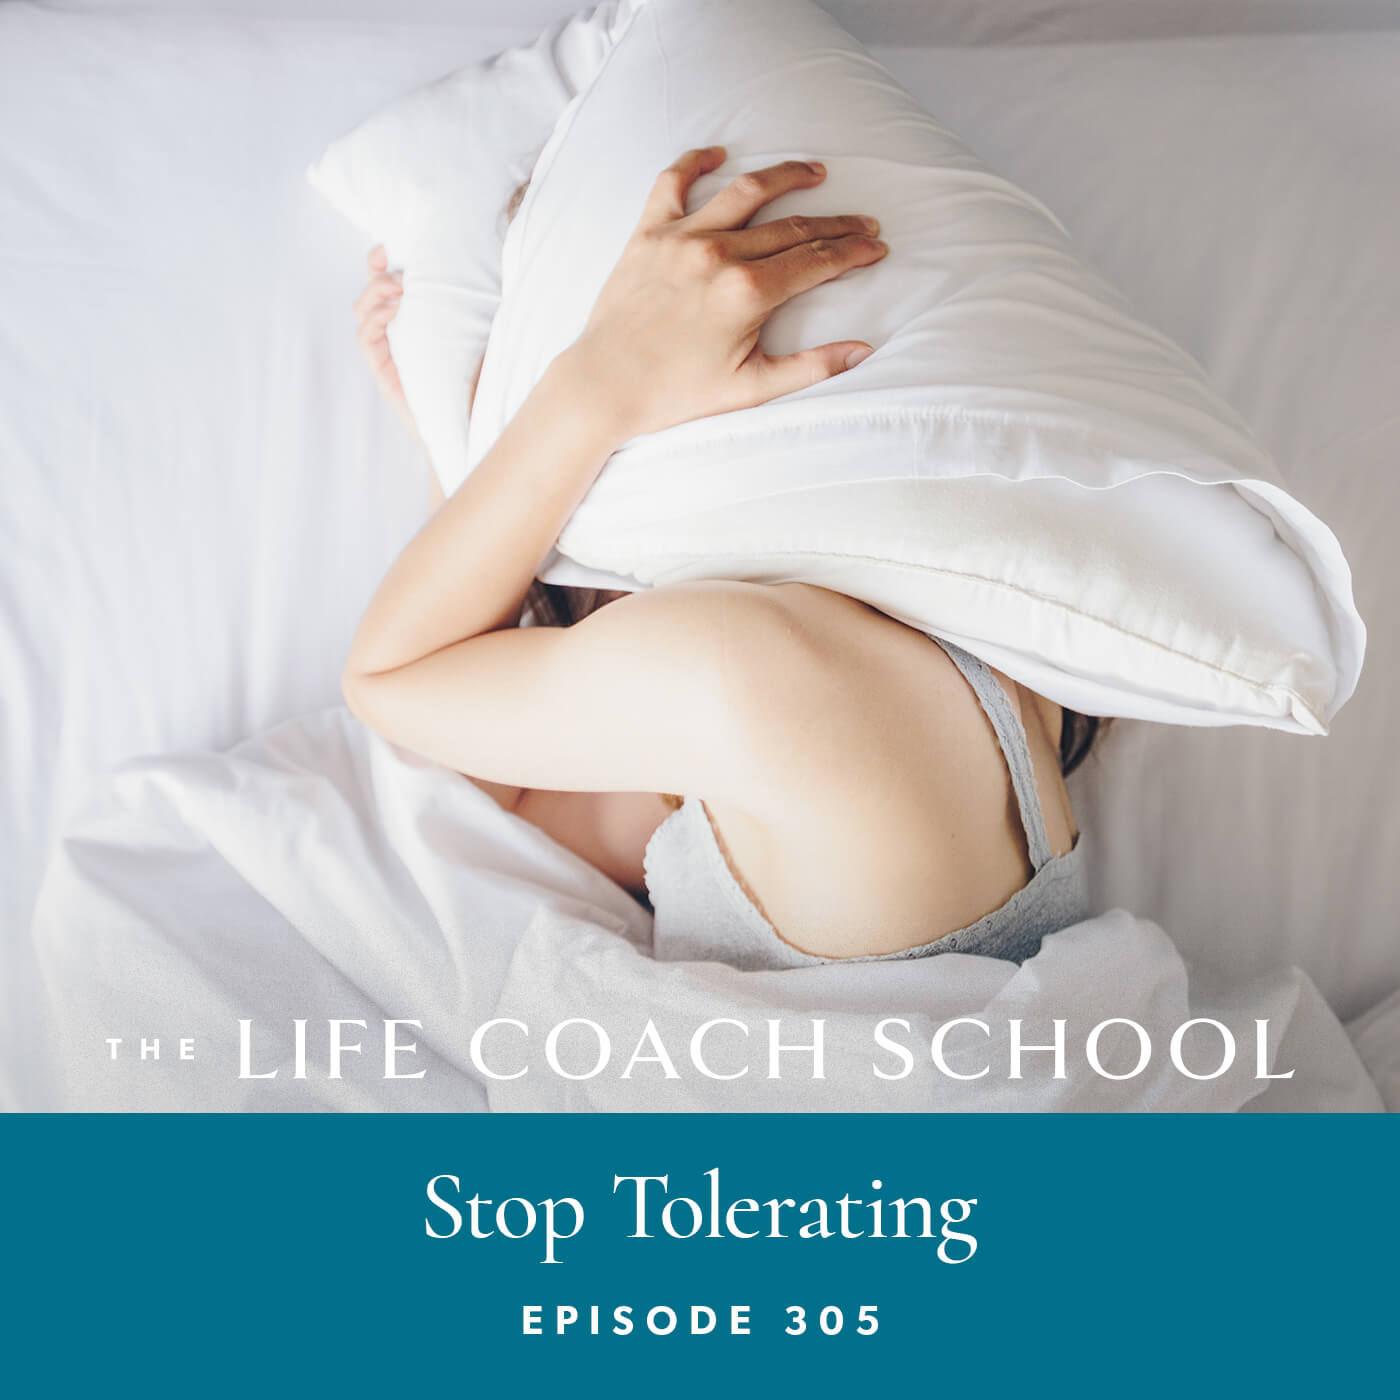 The Life Coach School Podcast with Brooke Castillo | Episode 305 | Stop Tolerating